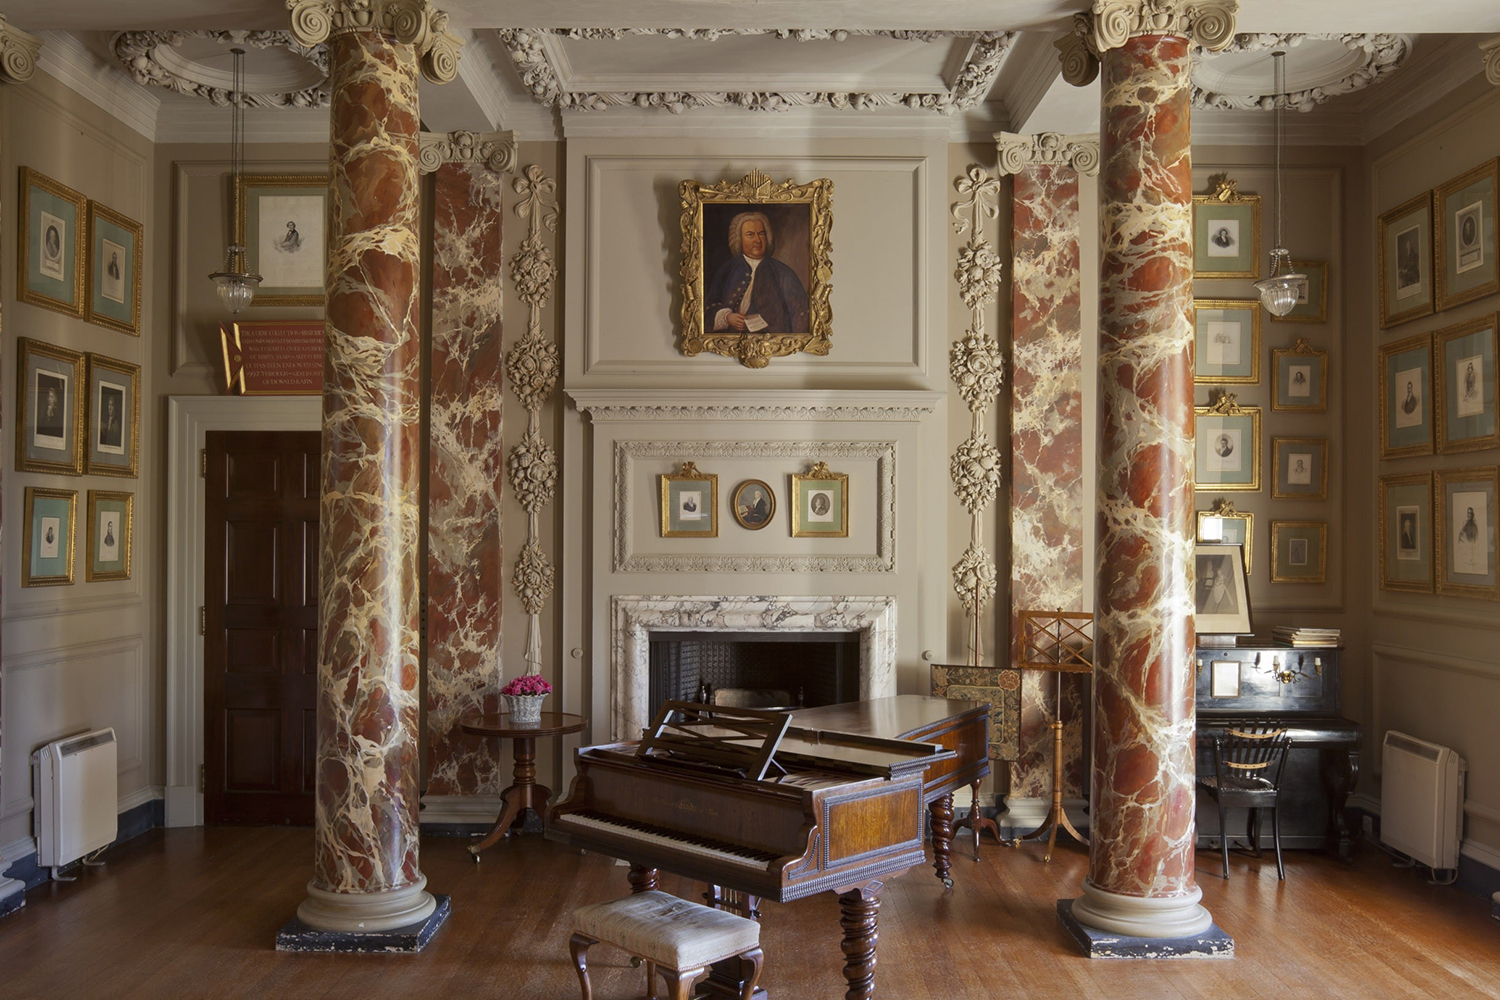 The ornate piano room at Hatchlands Park